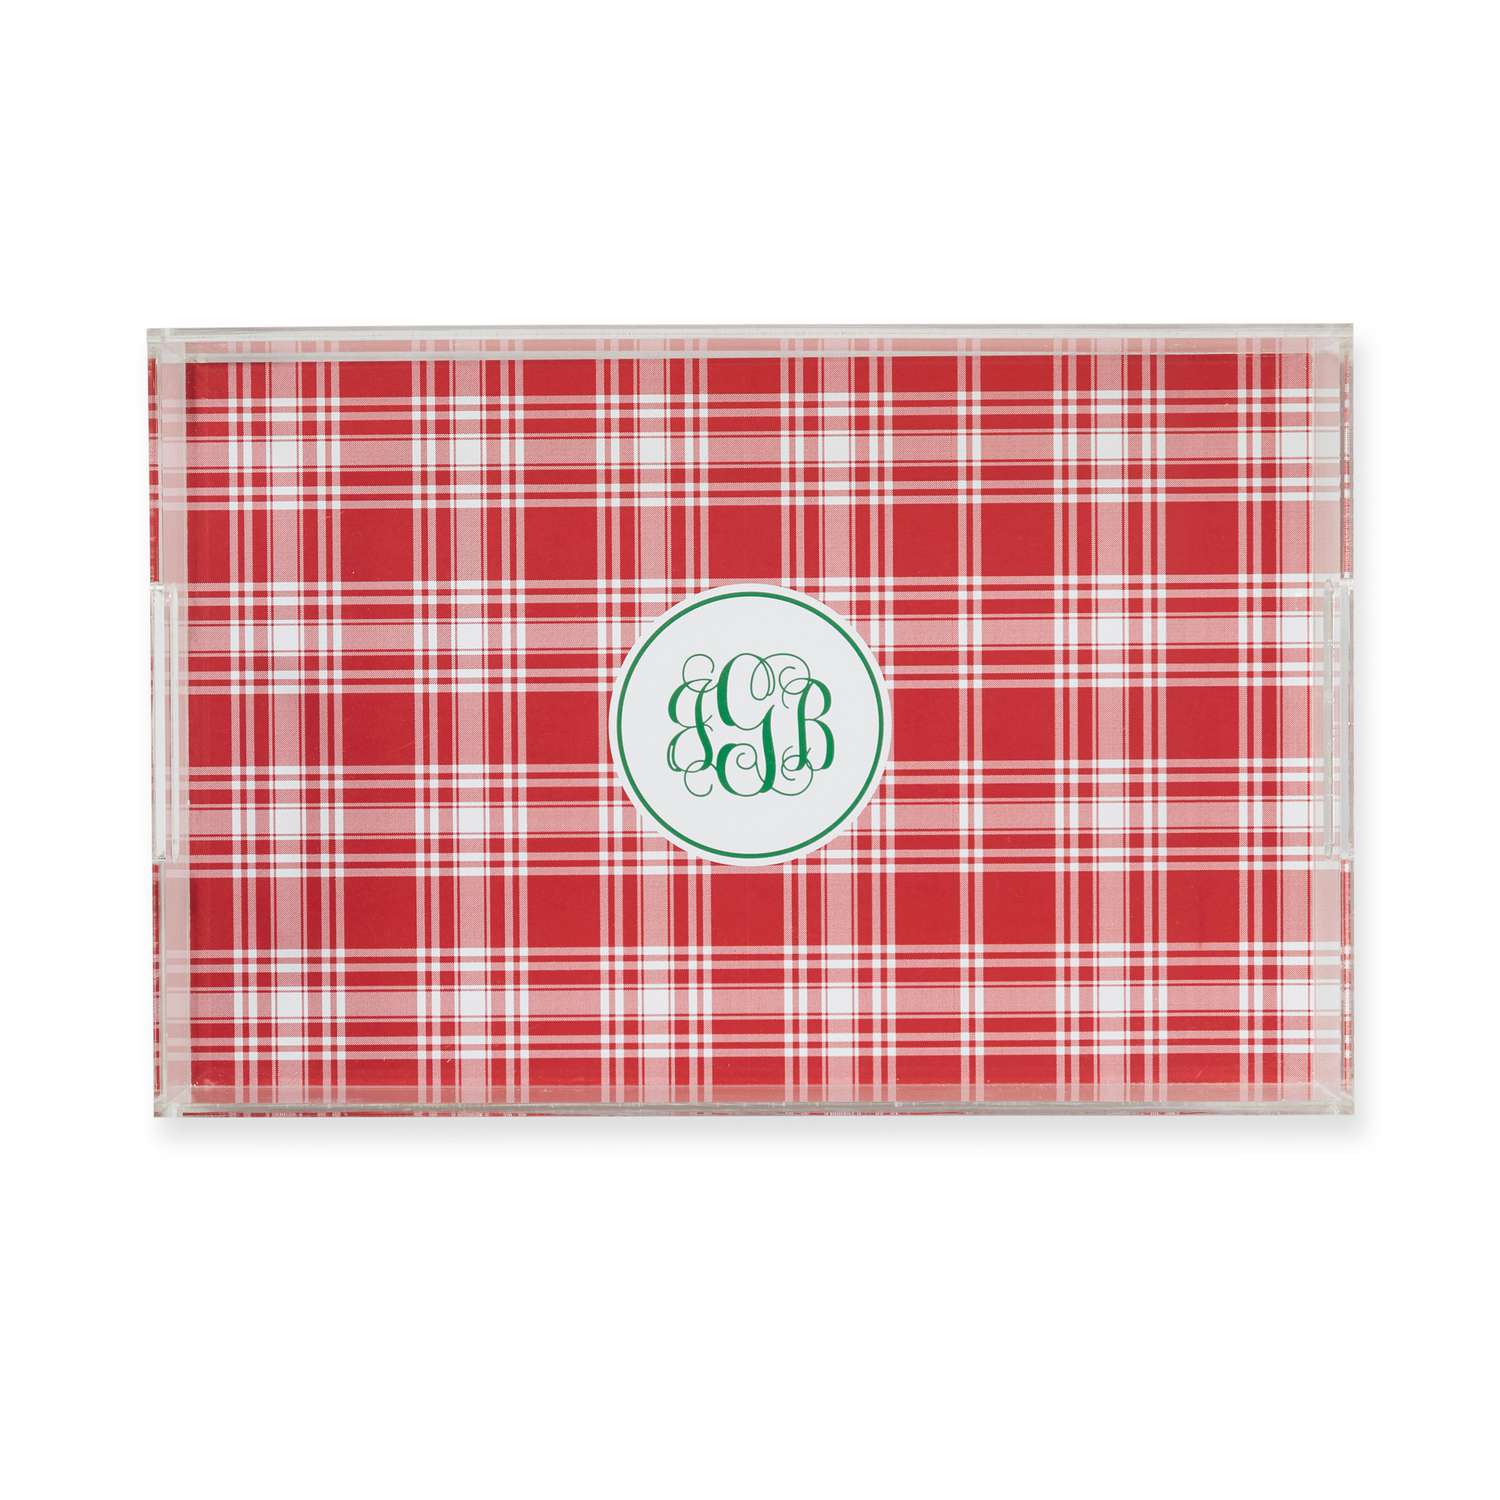 Patterned Lucite Tray with Monogram